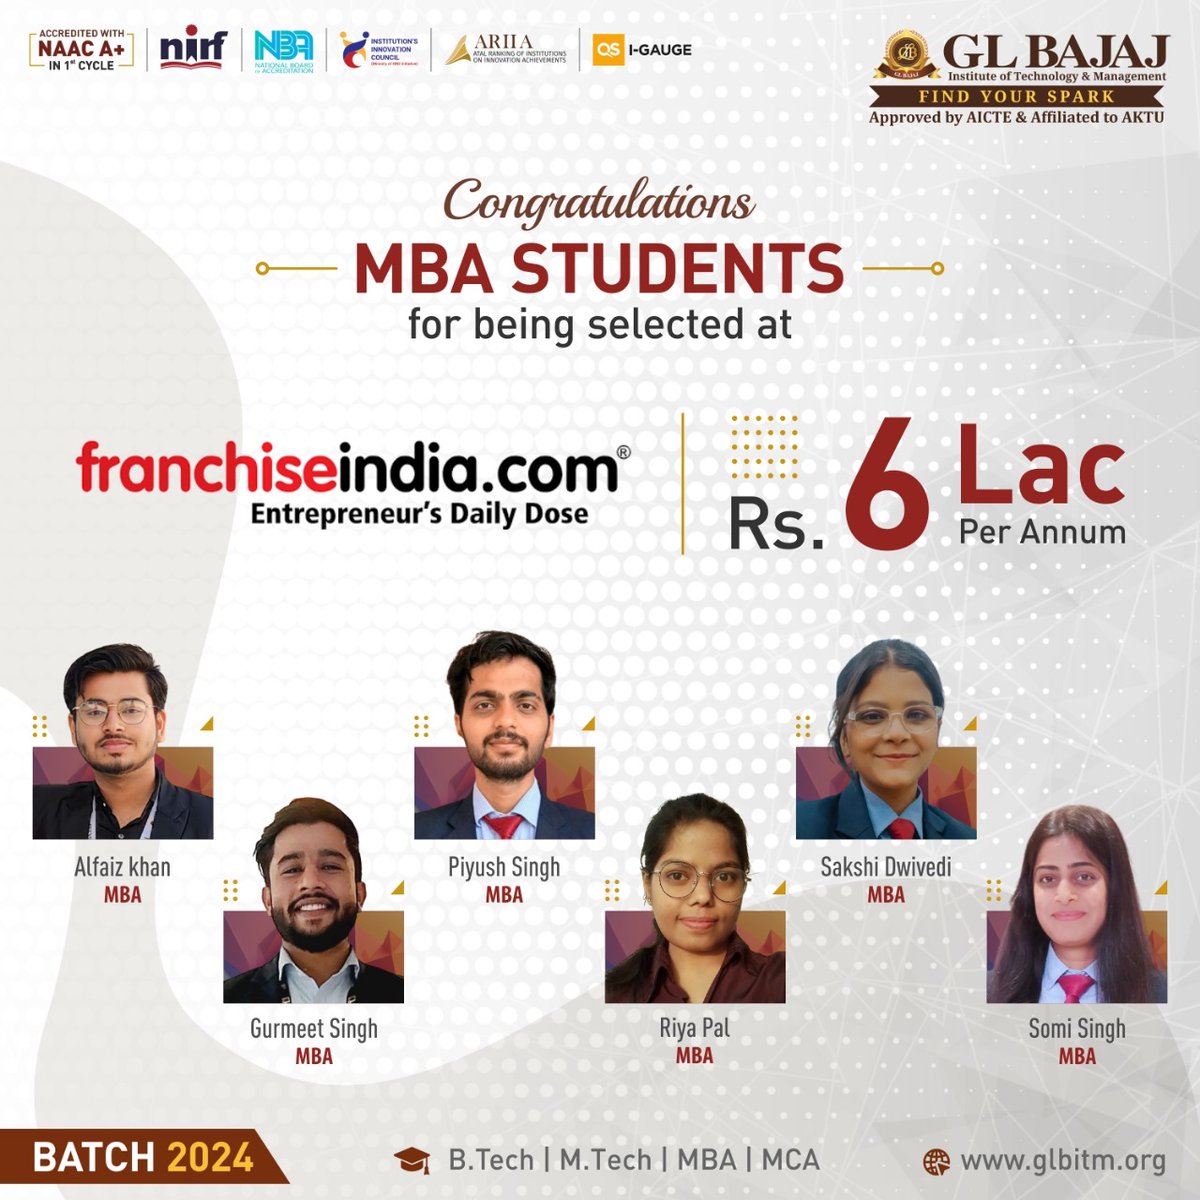 #GLBajaj (GLBITM) is filled with pride to announce that our 6 bright students from #MBA (#BusinessAnalytics) Batch 2024 have secured an incredible #placement at Franchise India Holding Ltd.

#GLBITM #campusplacements #jobs2024 #studentplacement #dreampackage #BEaGLBian #NAAC